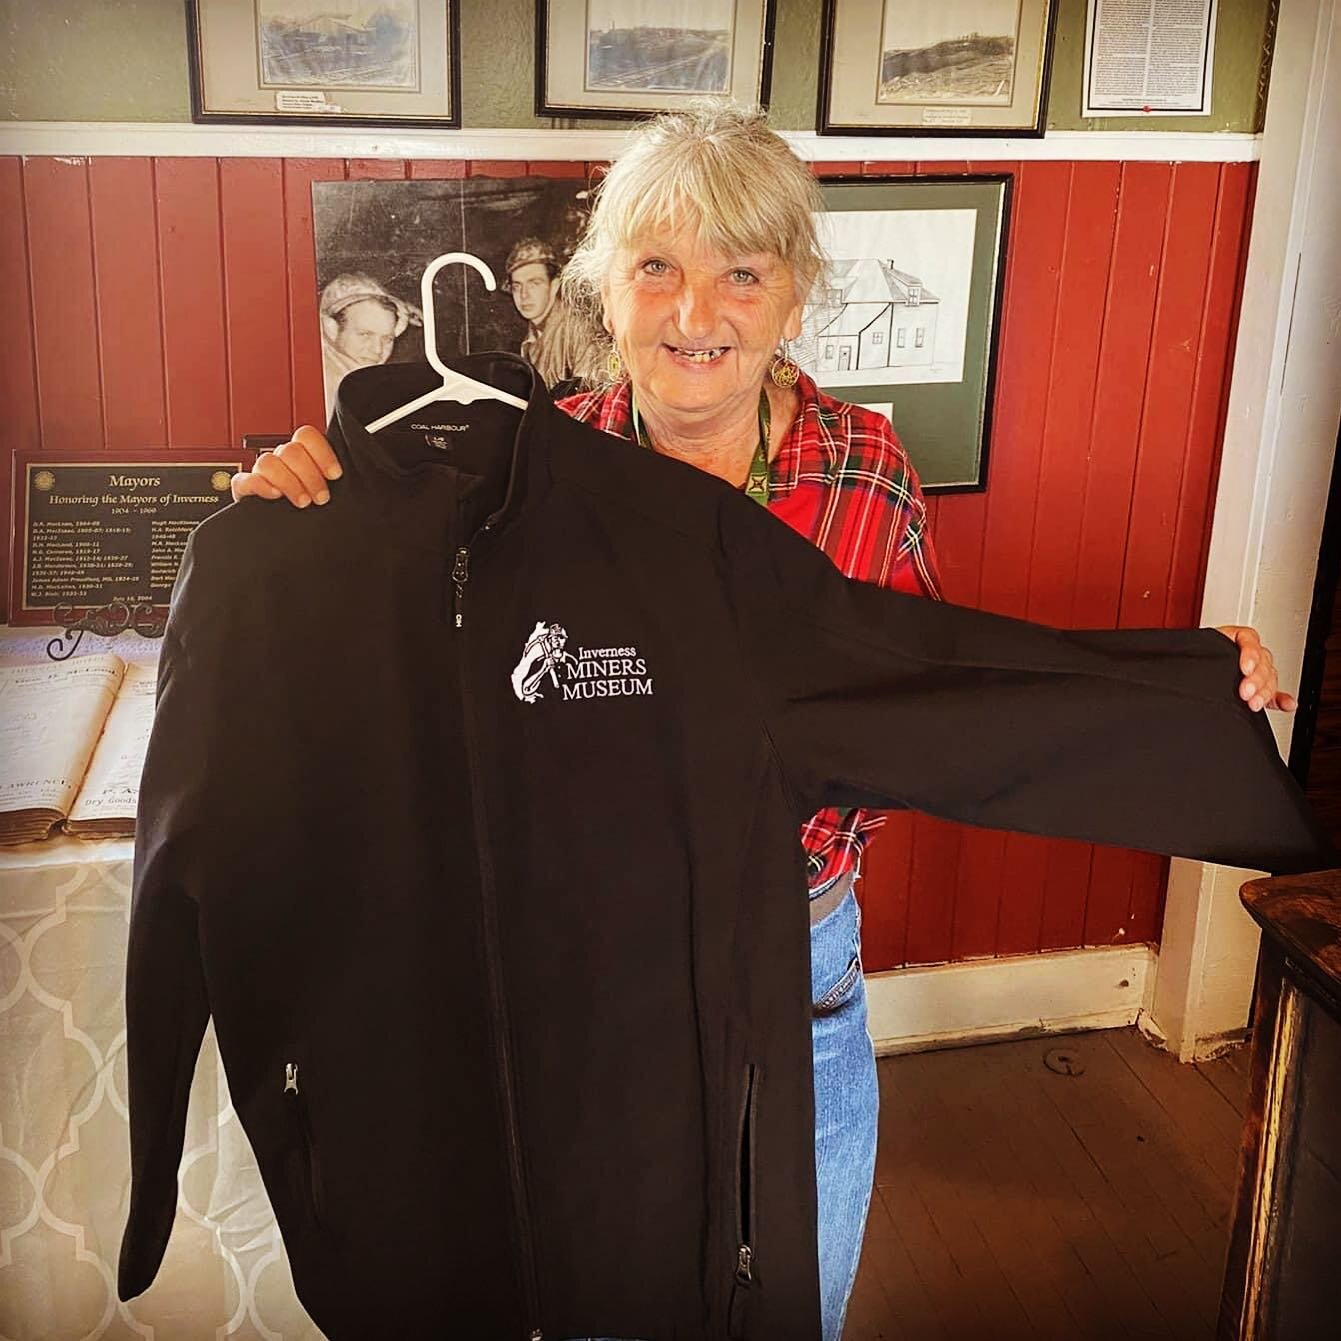 40% OFF SALE ON JACKETS!!!

Looking for a nice coat? Come on down to the Inverness Miners Museum and grab yourself a jacket with a Miners Museum logo on the chest. Starting tomorrow these jackets will be on sale for 40% off! That&rsquo;s just $75.00!